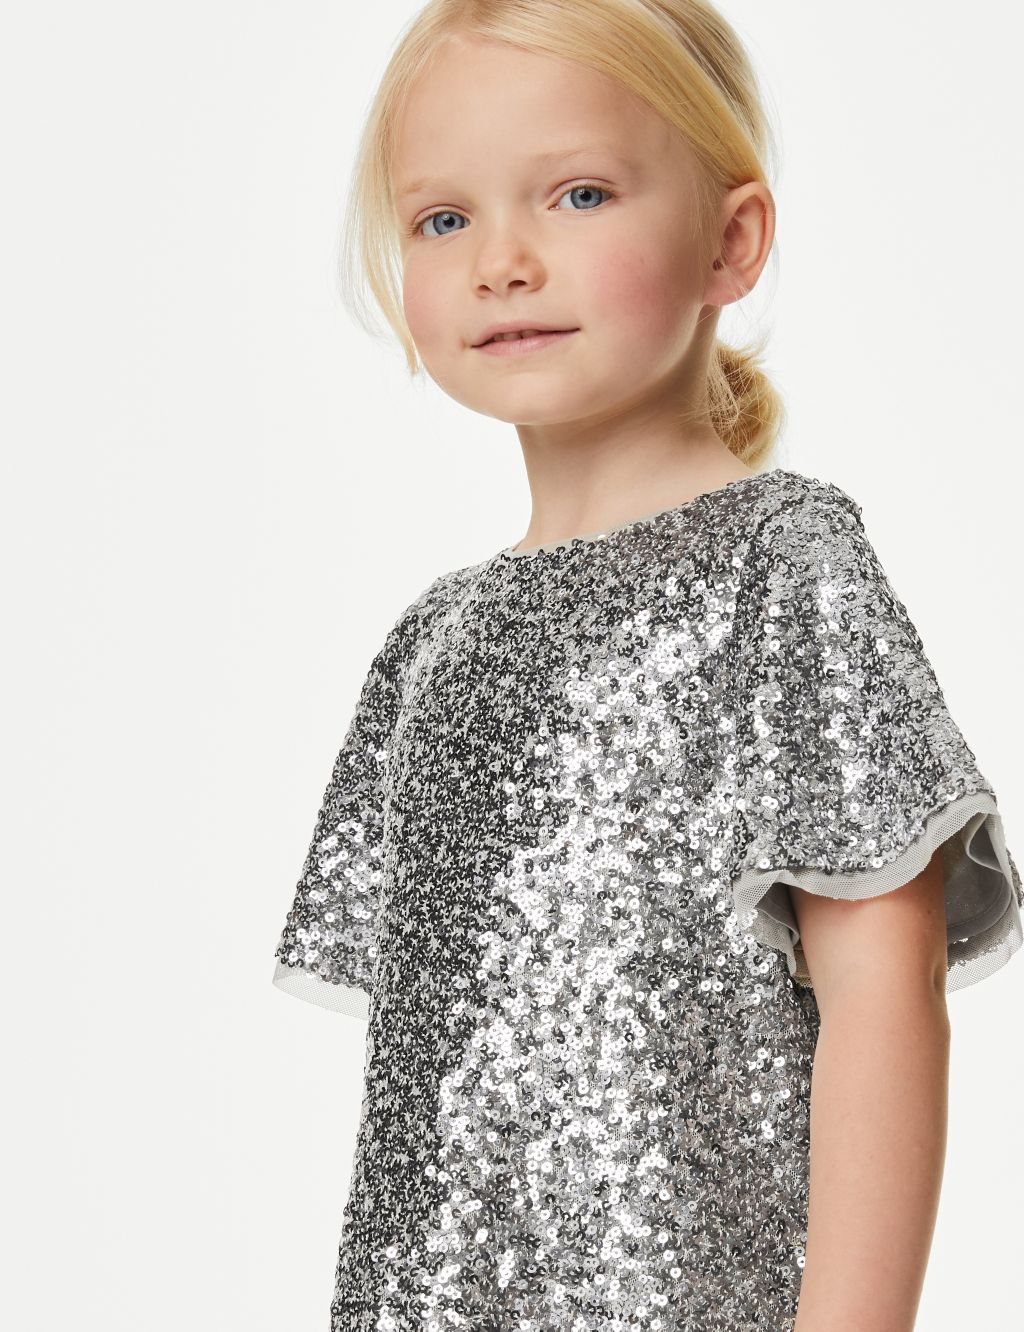 Sequin T-Shirt (2-8 Yrs) image 1